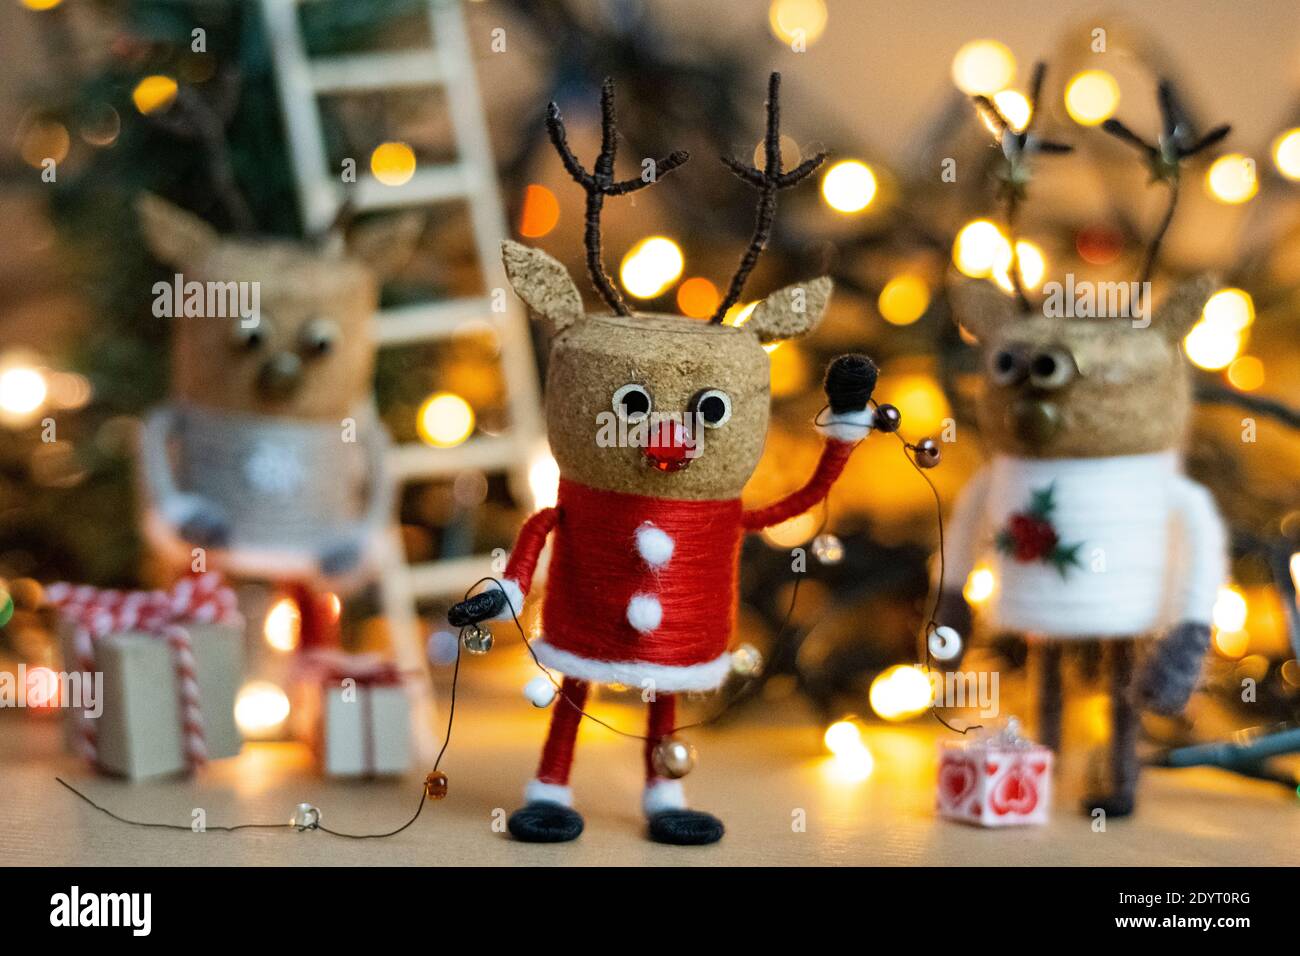 Creative Christmas Concept Winter Festive Cork deer figures celebrating Boxing Day in Santa suit Scandinavian concept recycled Christmas ornaments Stock Photo